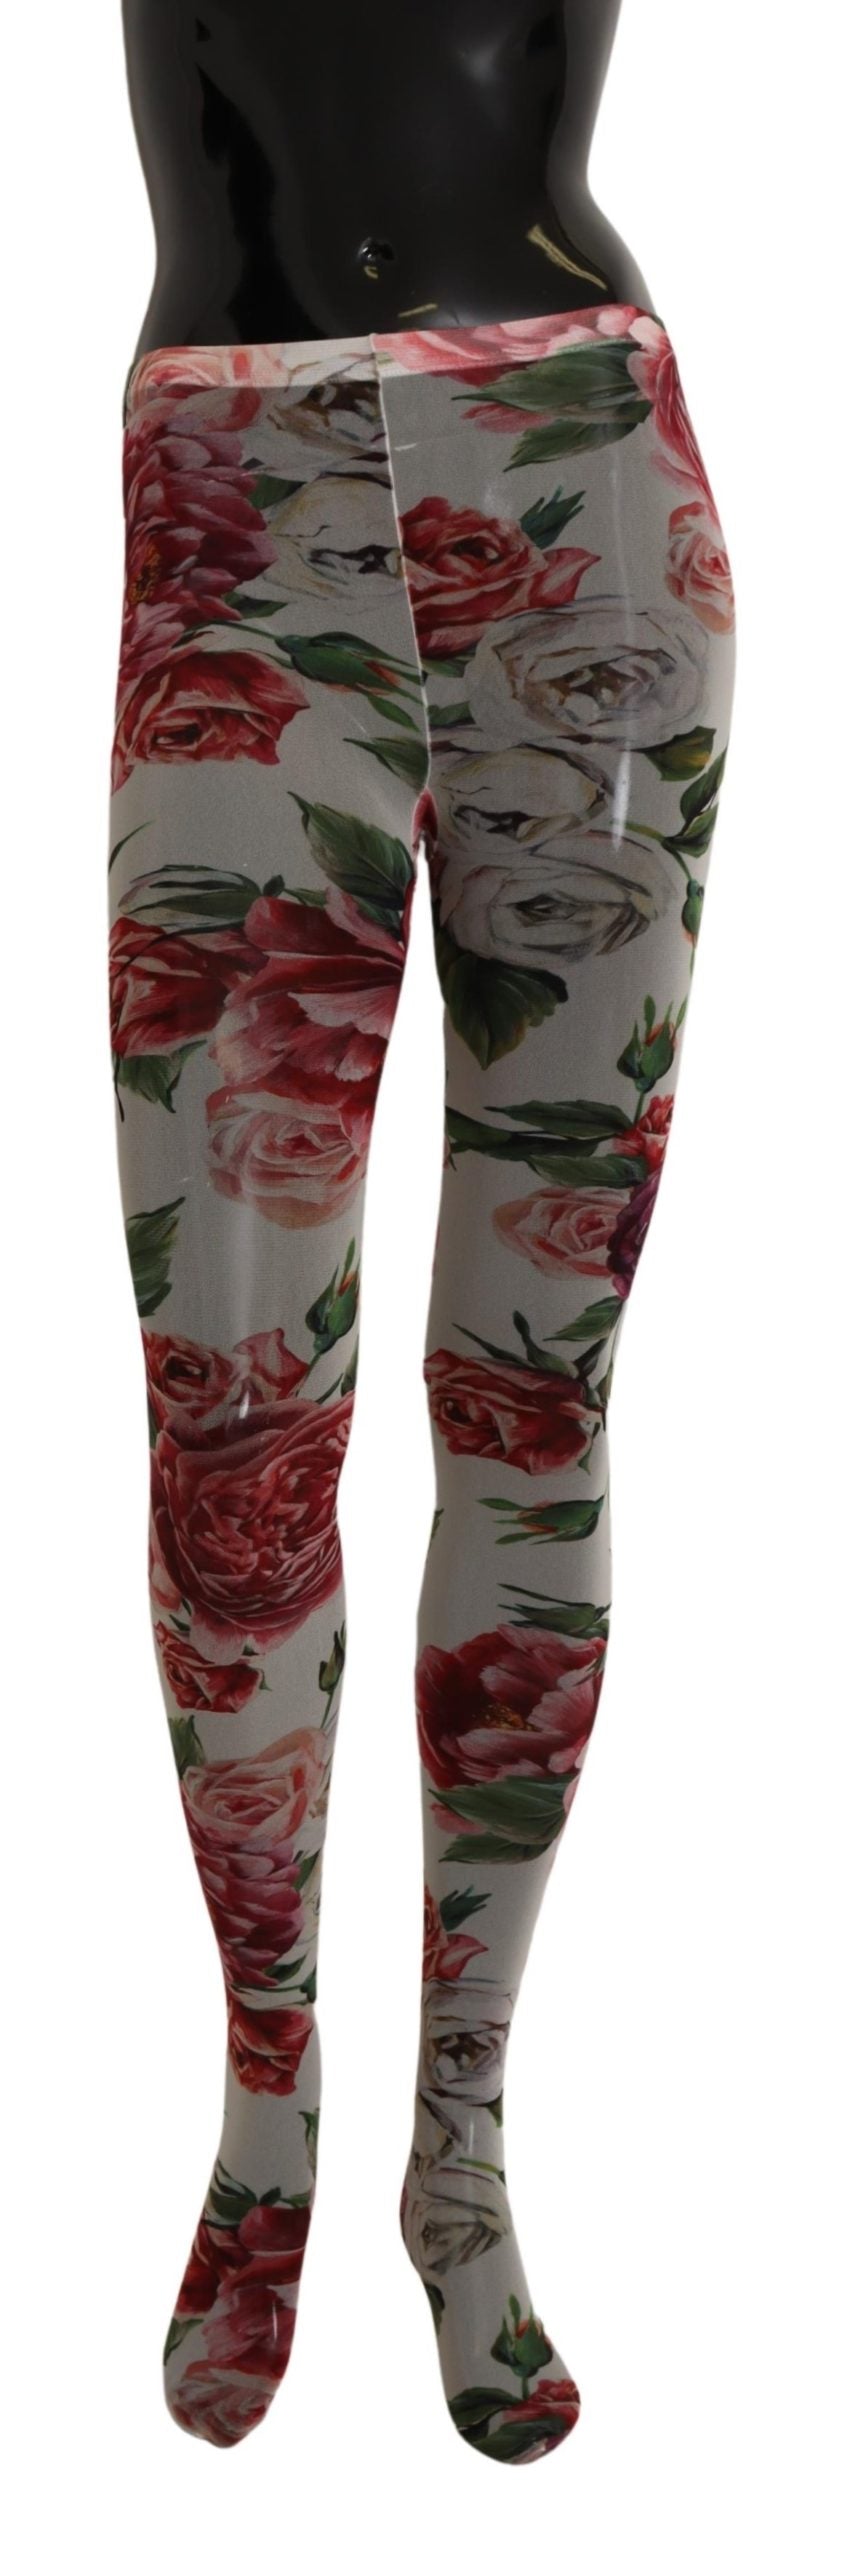 Dolce & Gabbana Red Floral Leggings Stretch Waist Women's Pants Authentic